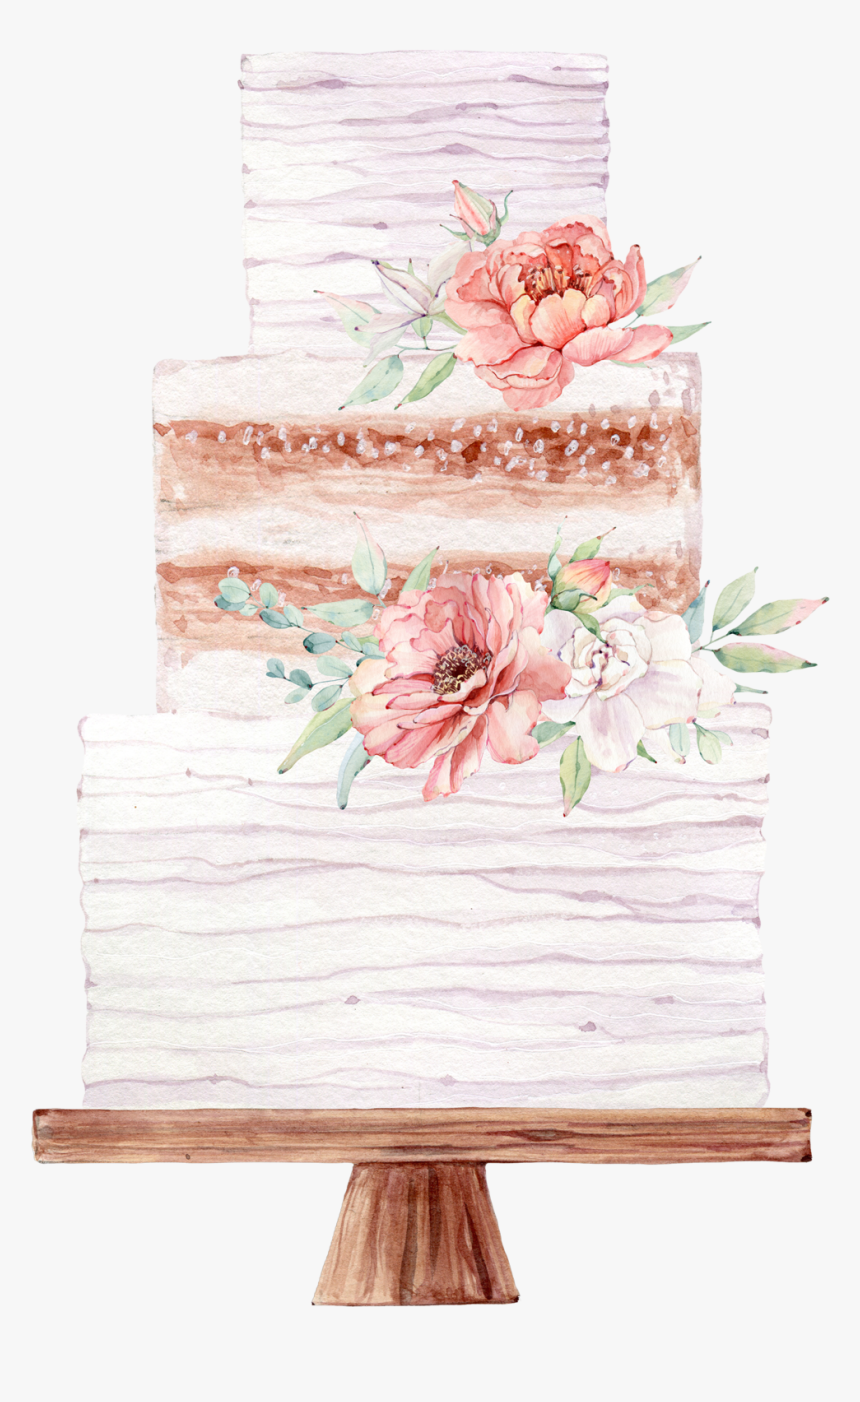 Download Wedding Anniversary Cake Png PNG Image with No Background -  PNGkey.com